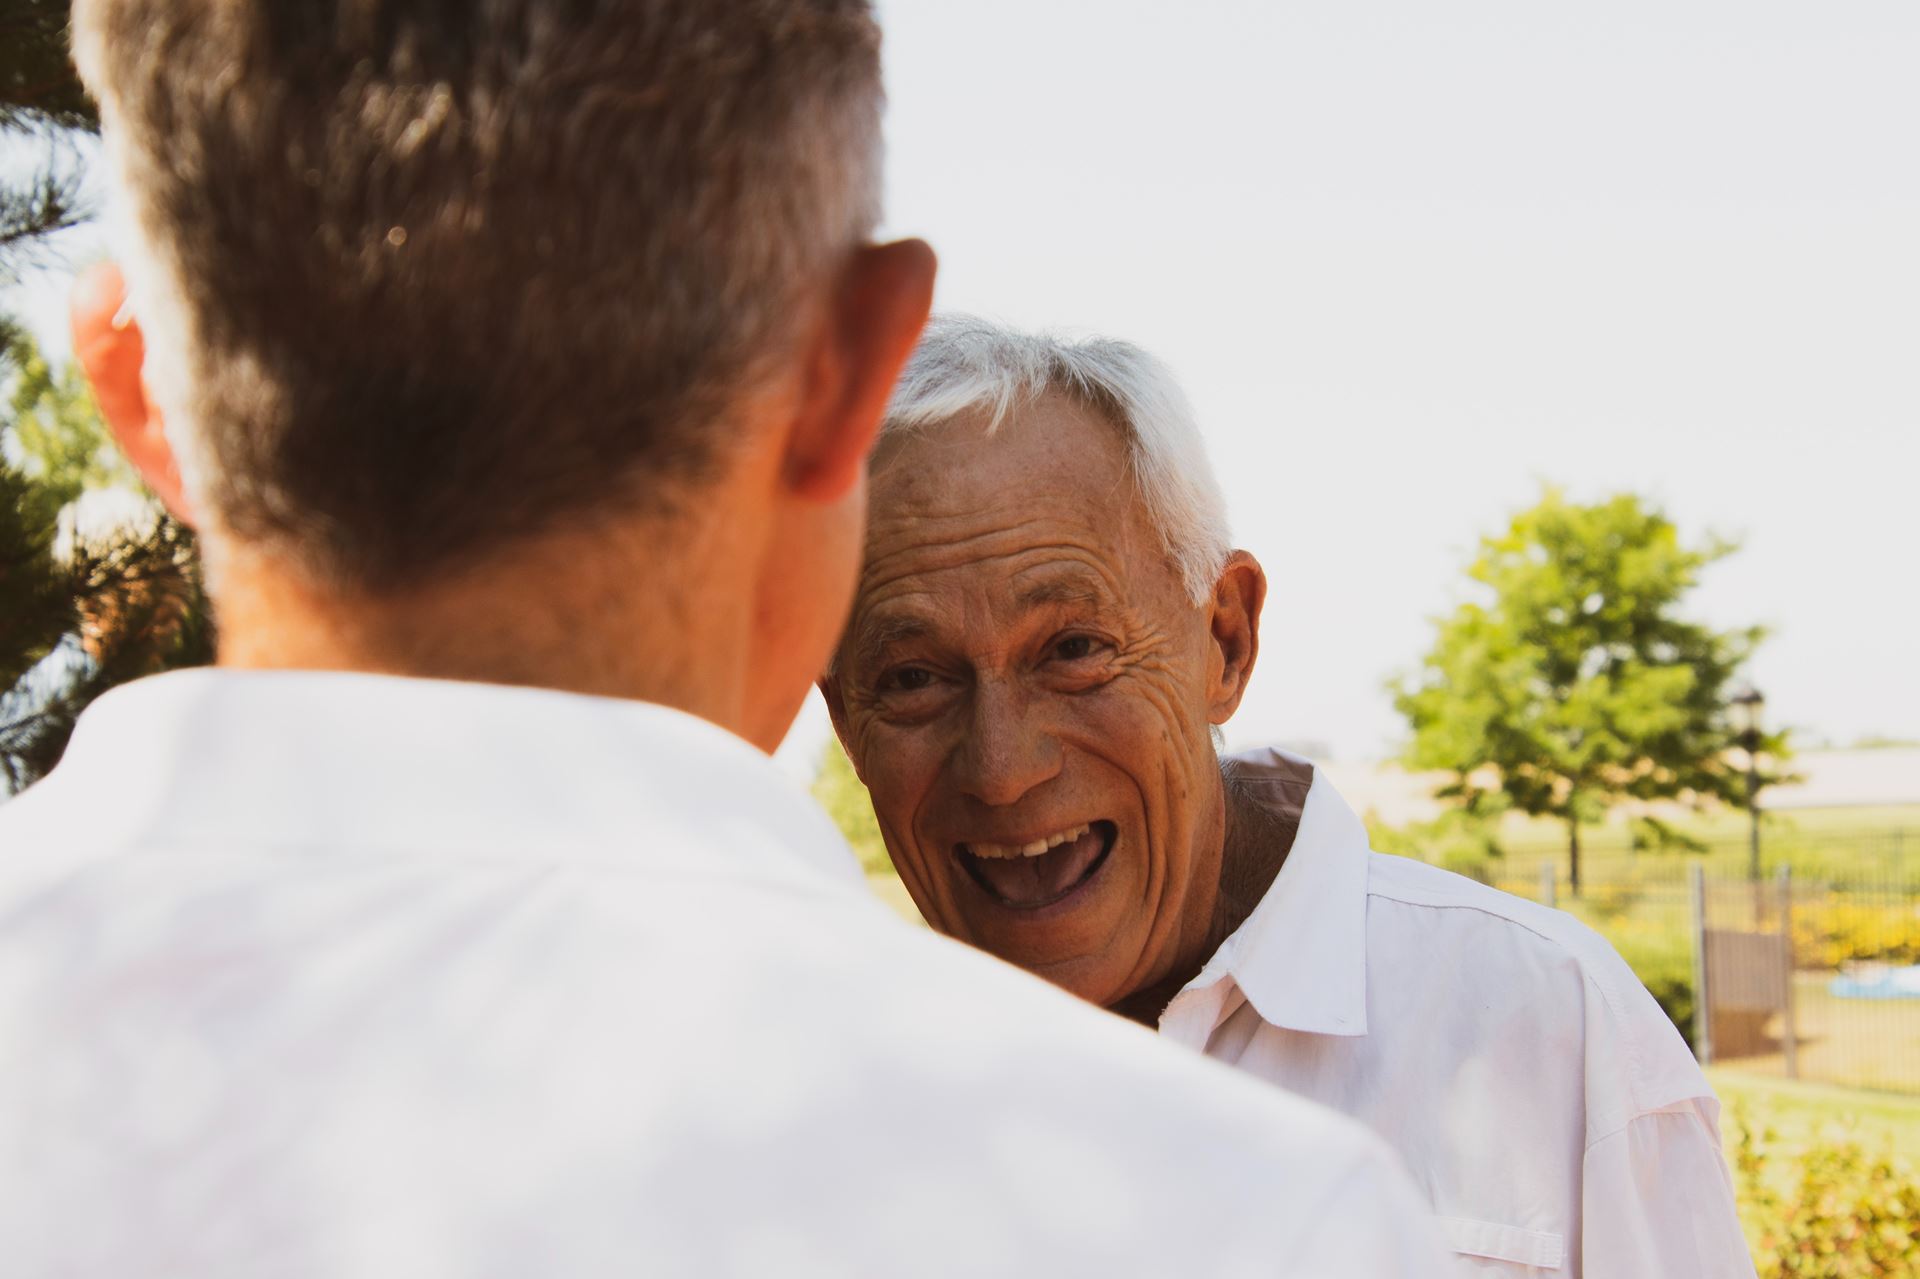 An older man laughing speaking to a younger man